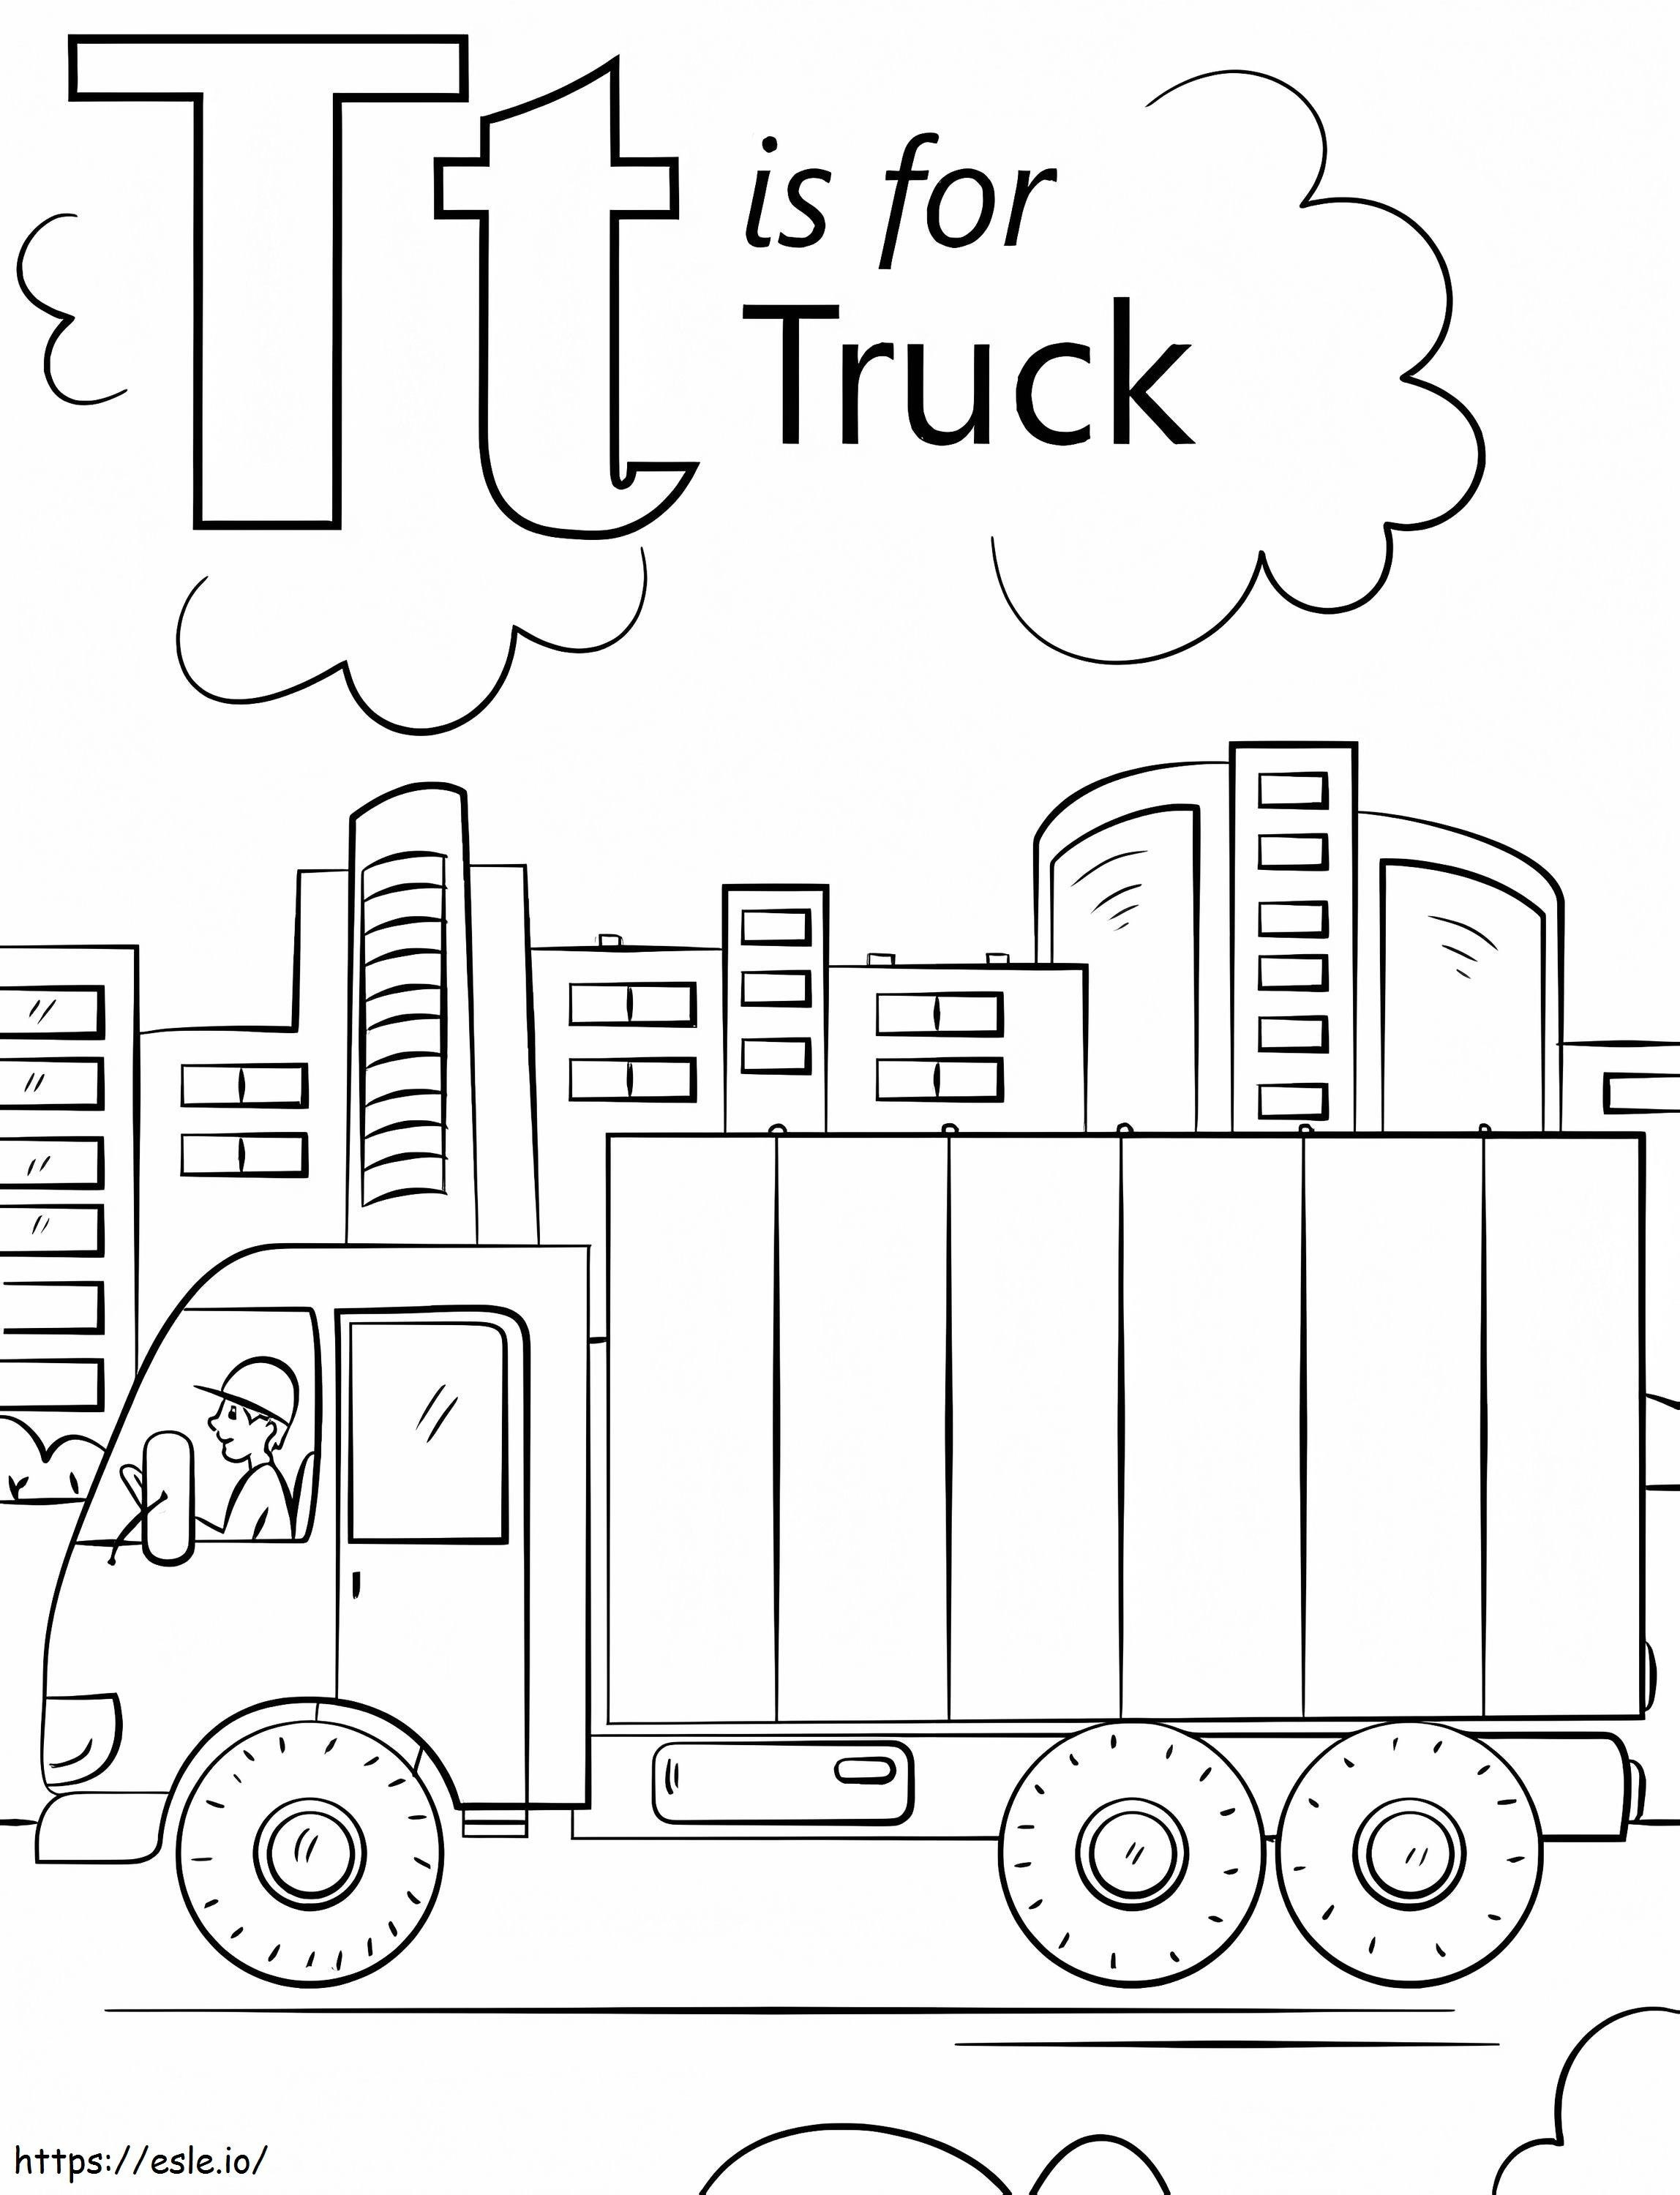 Truck Letter T coloring page